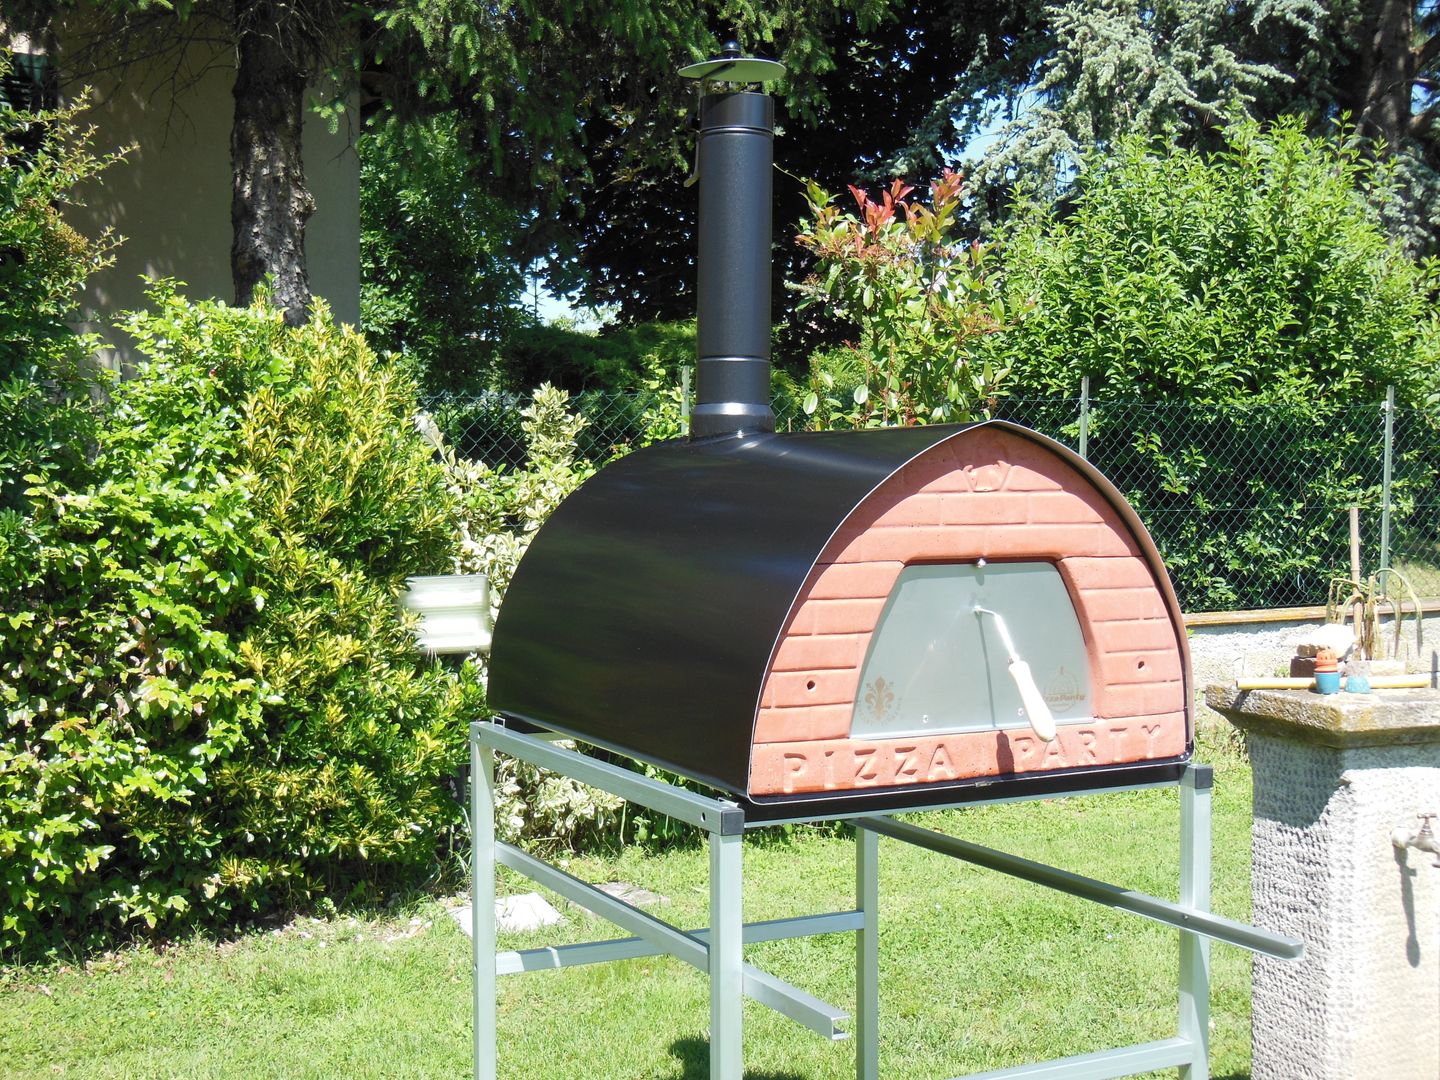 Wood fired pizza oven Pizzone by Pizza Party Genotema SRL Unipersonale Rustik Bahçe Ocak & Barbekü